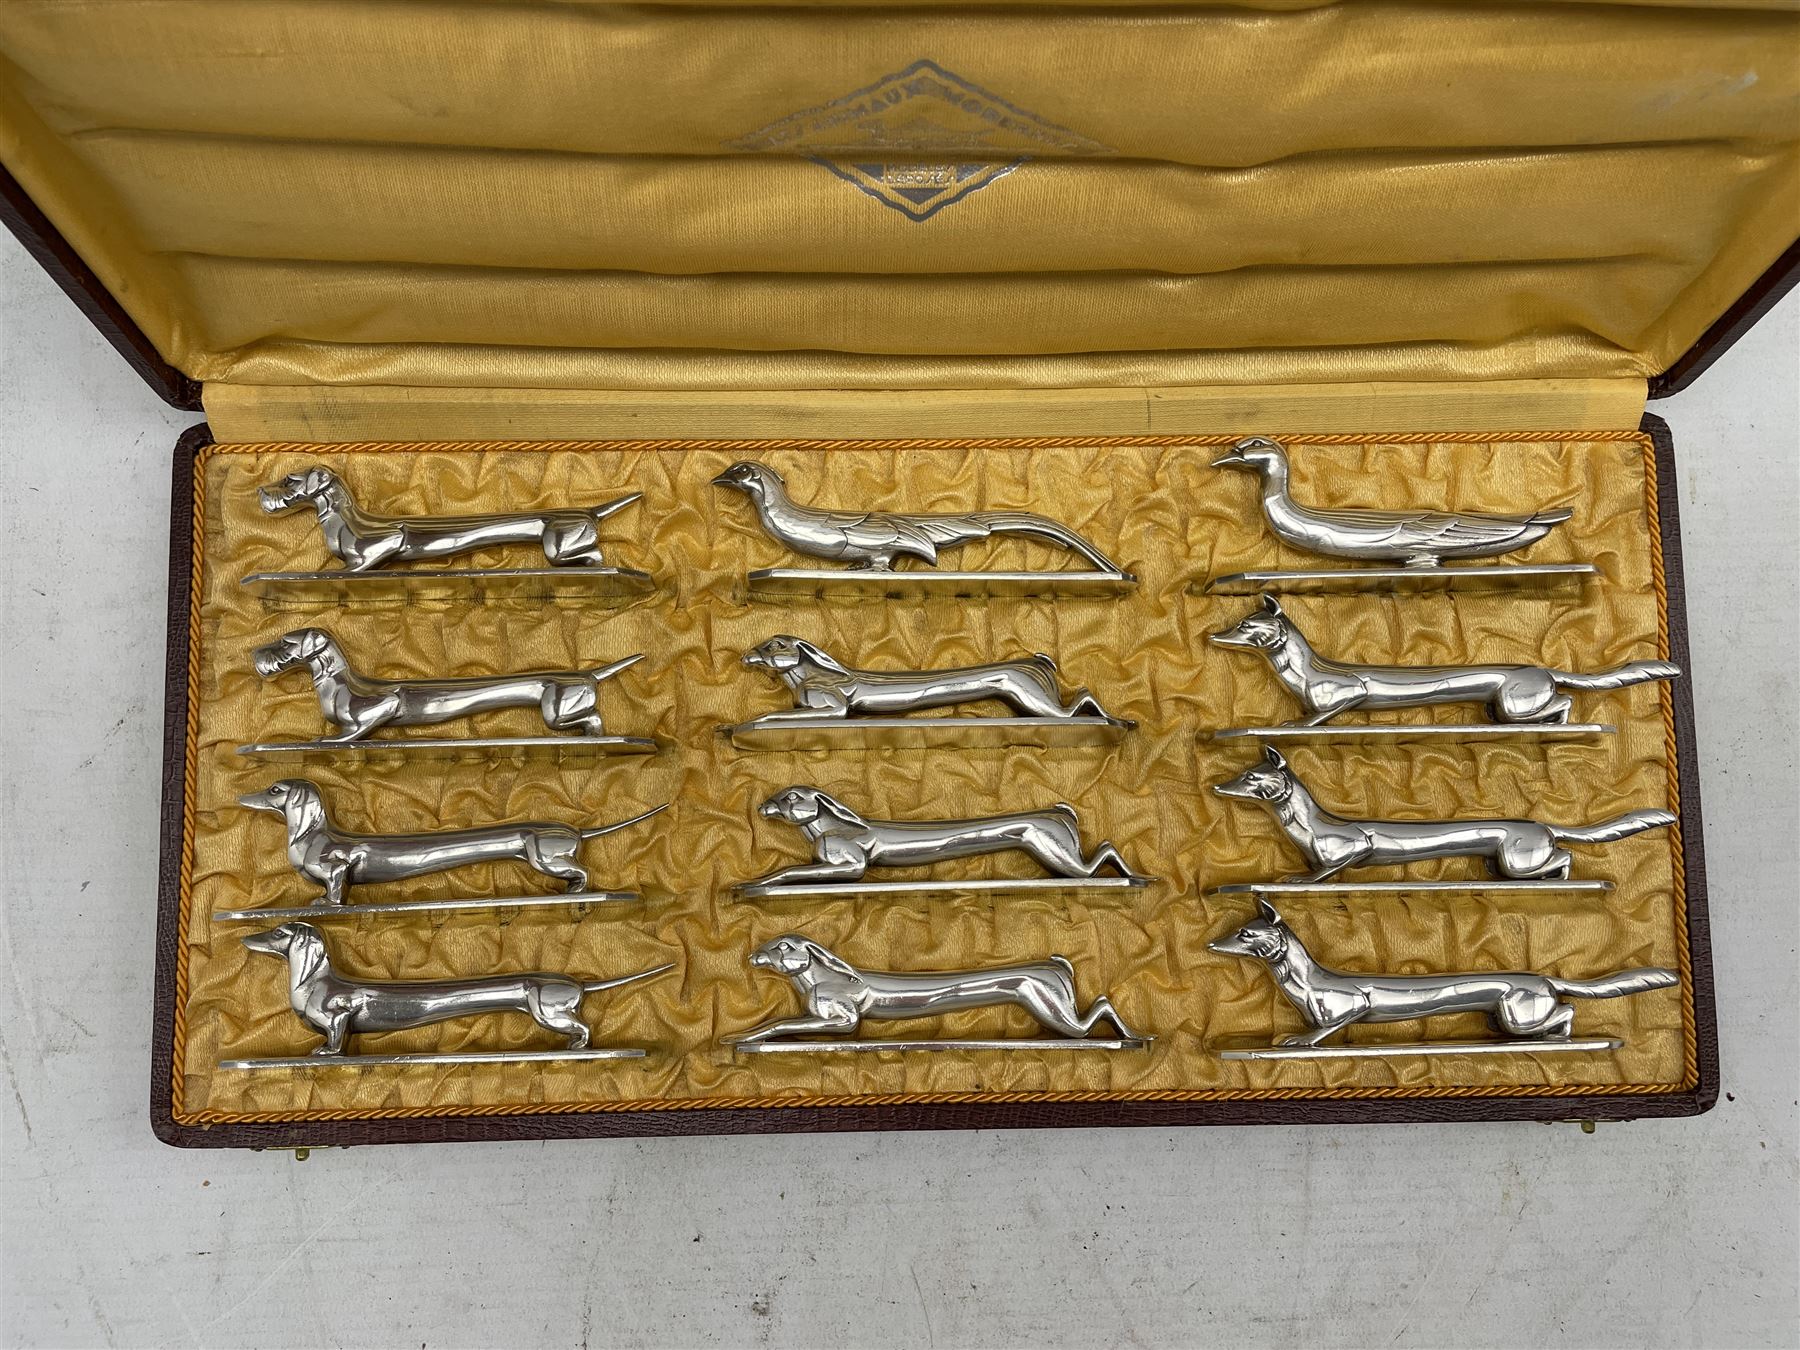 'Les Animaux Modernes' a set of twelve early 20th century French silvered-bronze knife rests cast as - Image 4 of 4